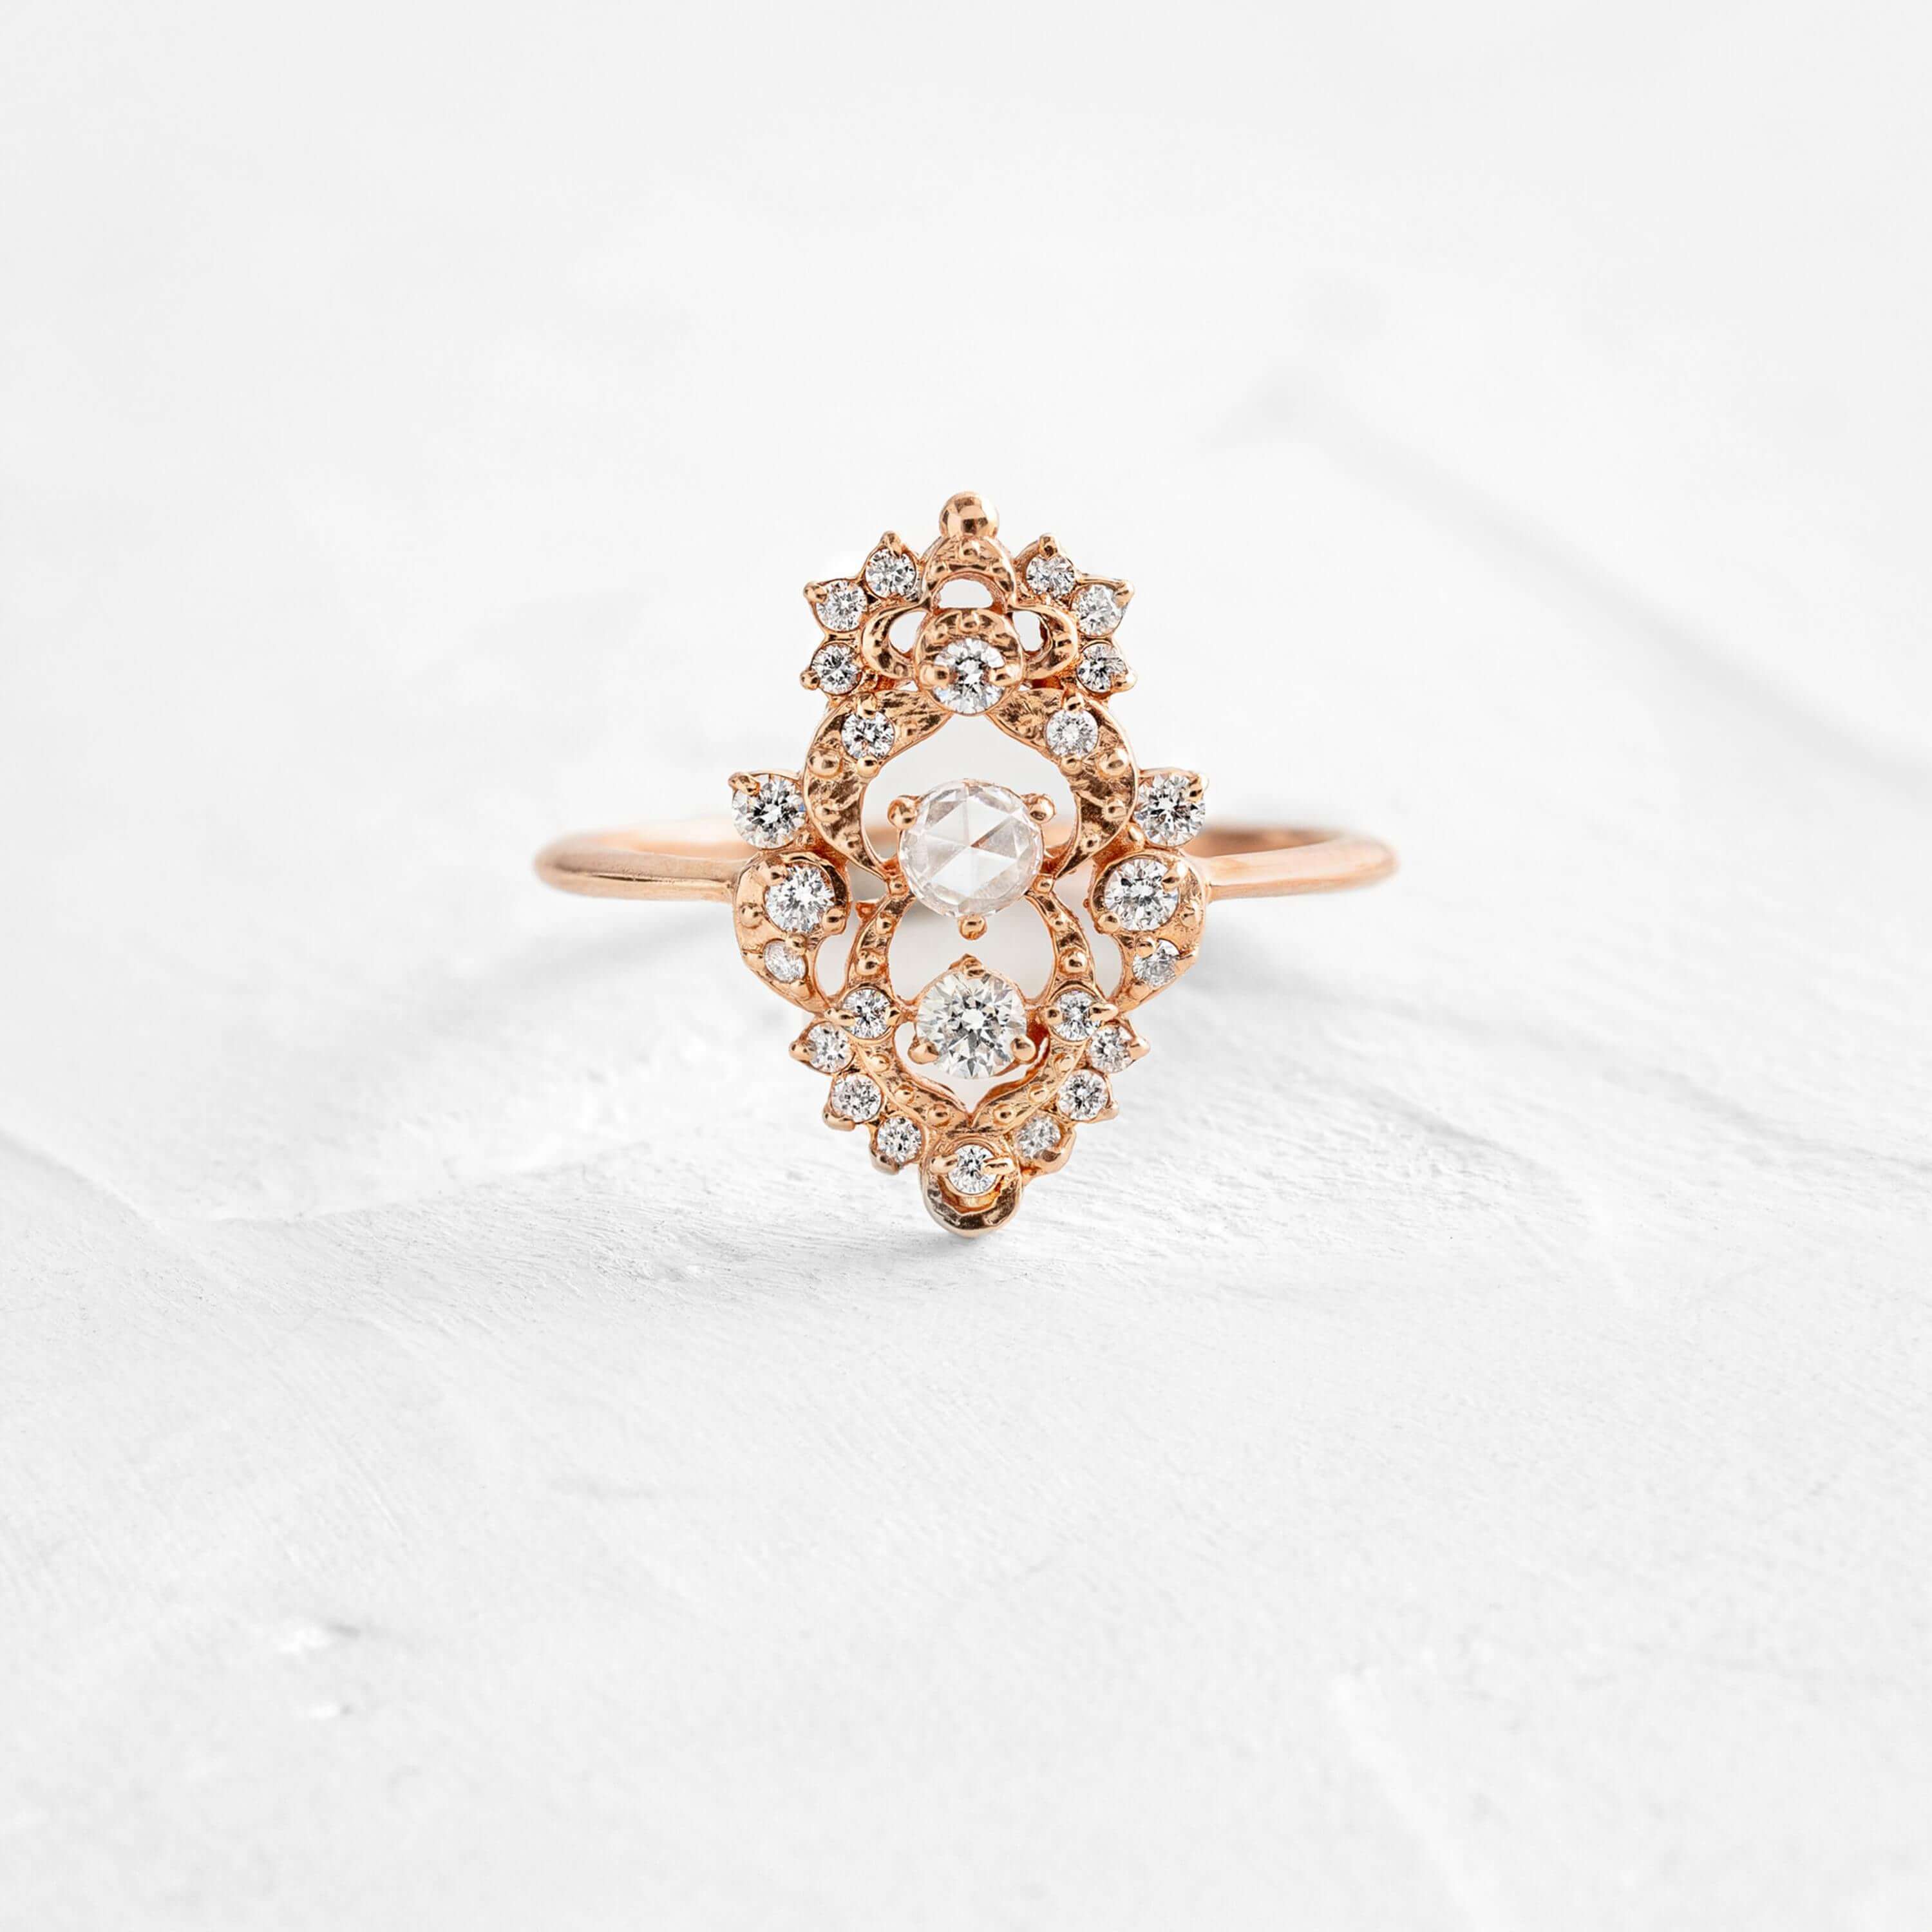 Ring Collection  Delicate & Unique Cluster Designs from Melanie Casey